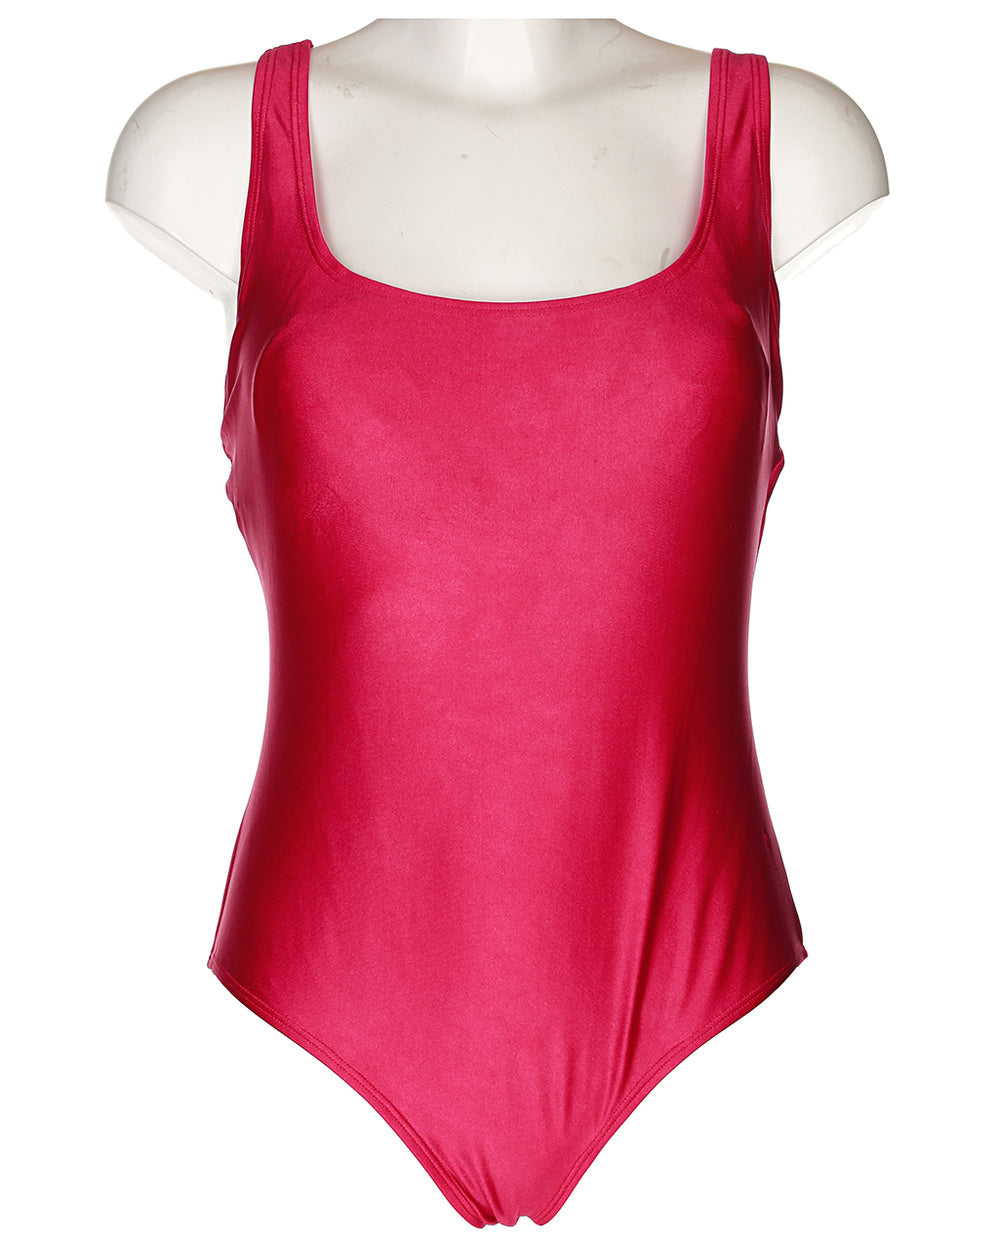 90's Pink One Piece Swimsuit - L